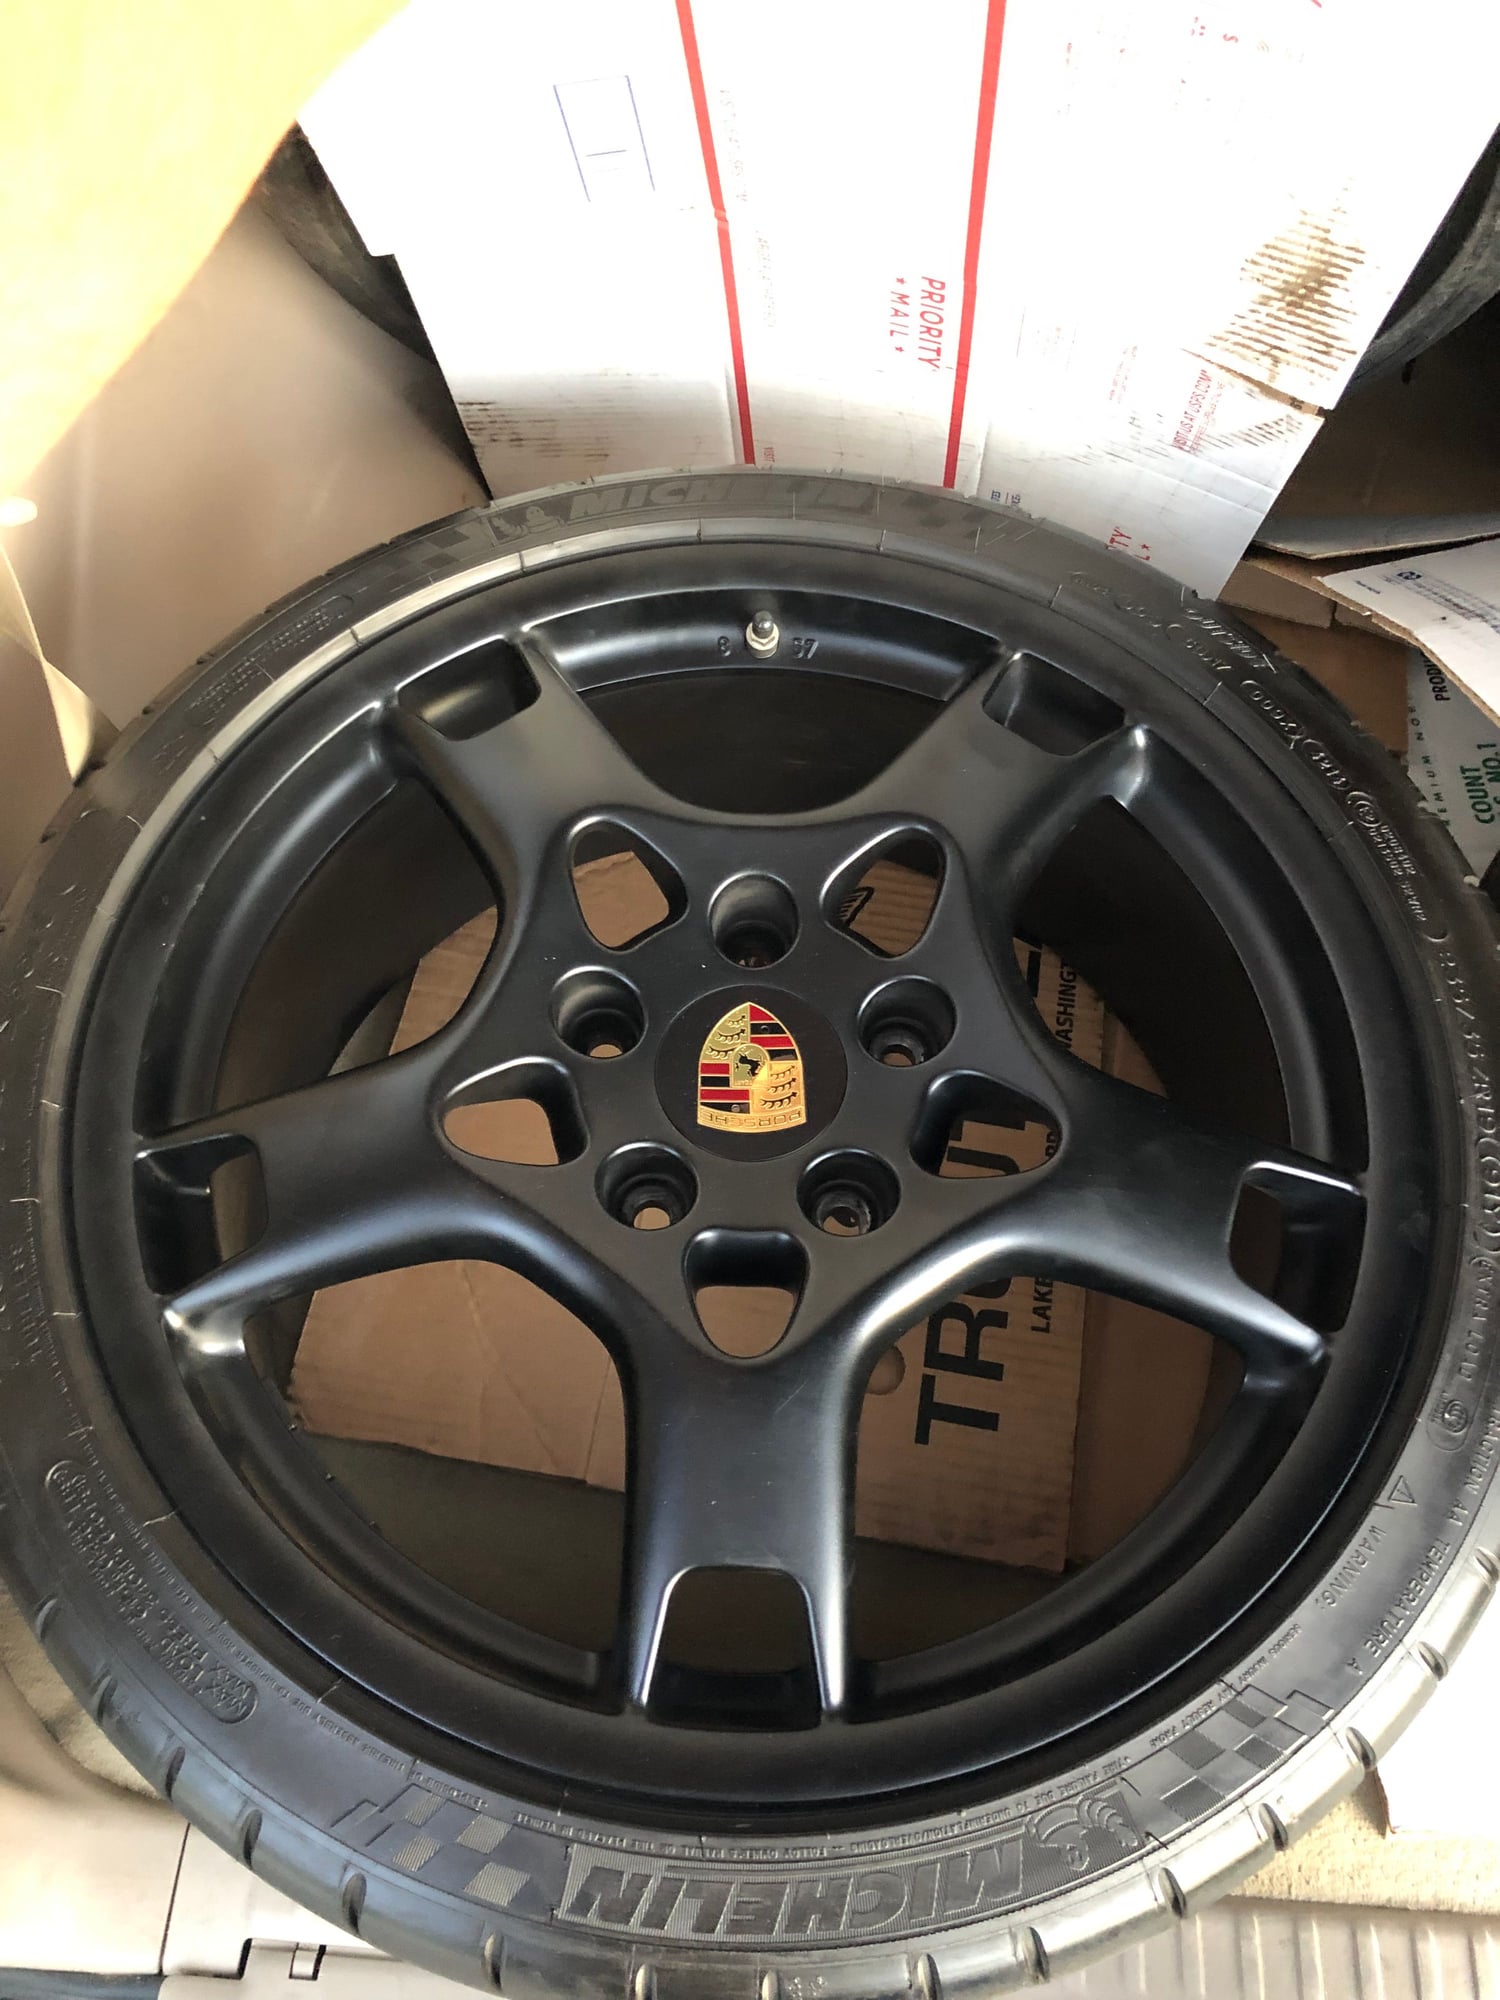 Wheels and Tires/Axles - Set of 19" satin black oem lobster fork rims with Michelins and tpms - Used - 2005 to 2009 Porsche 911 - Monterey Park, CA 91755, United States